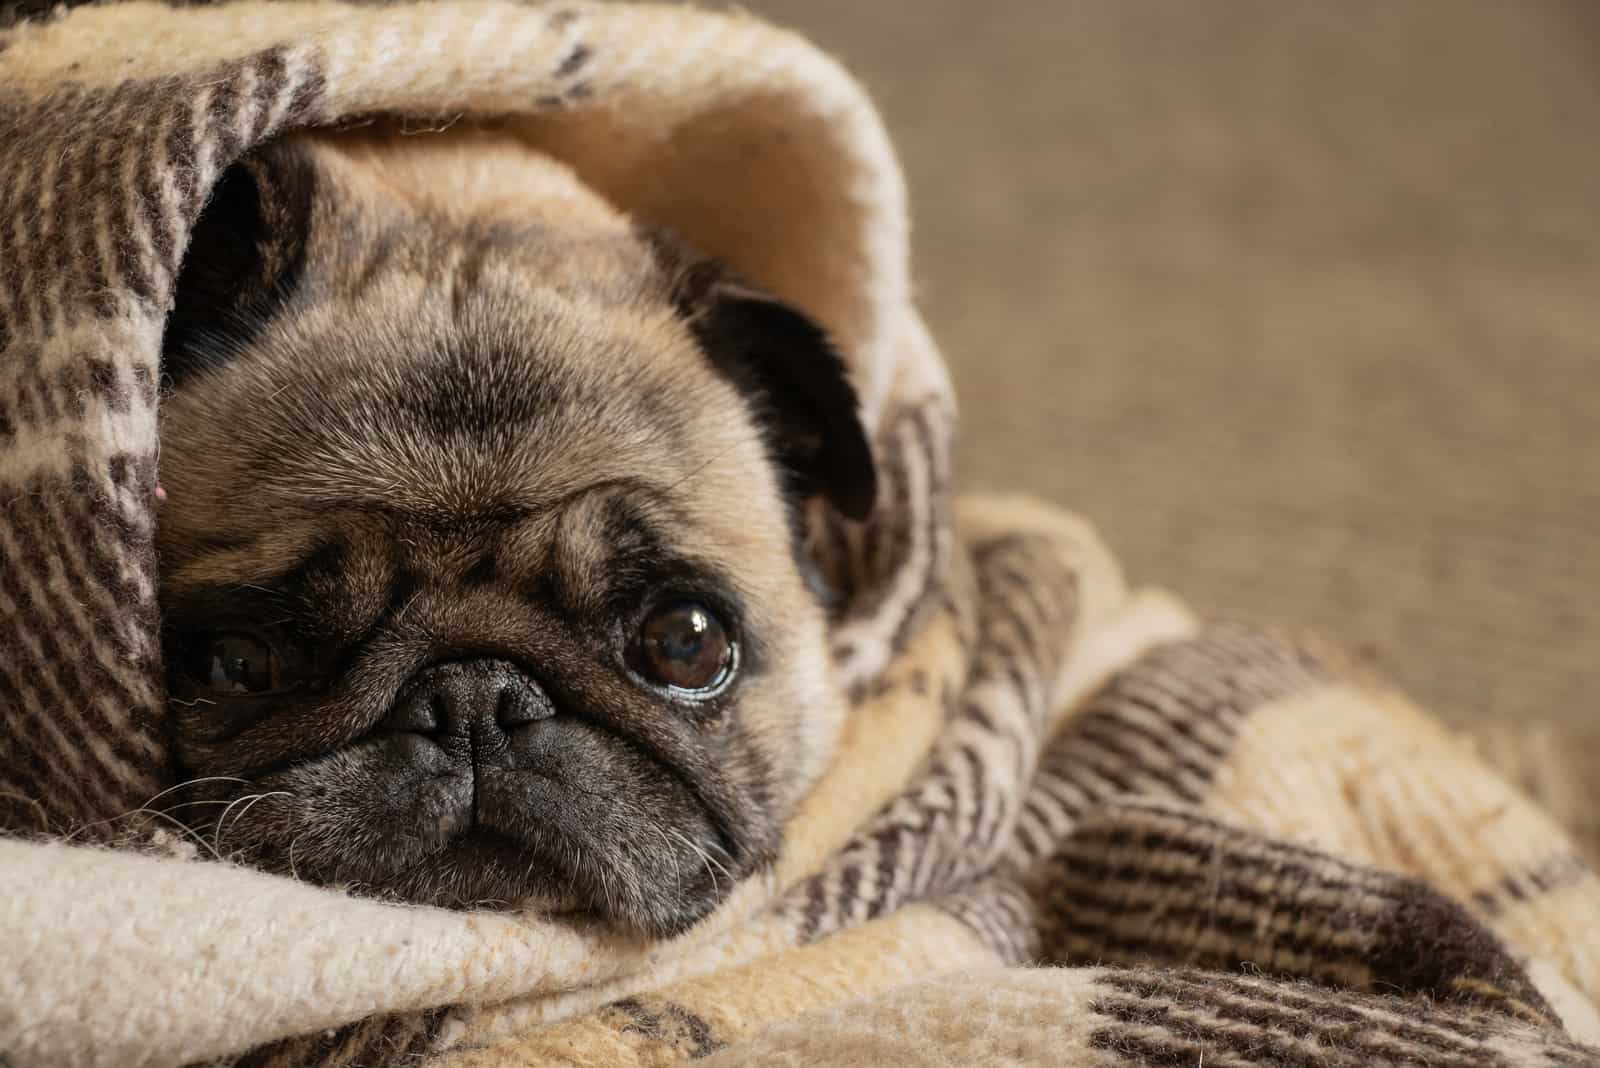 pug lying wrapped up in scarf